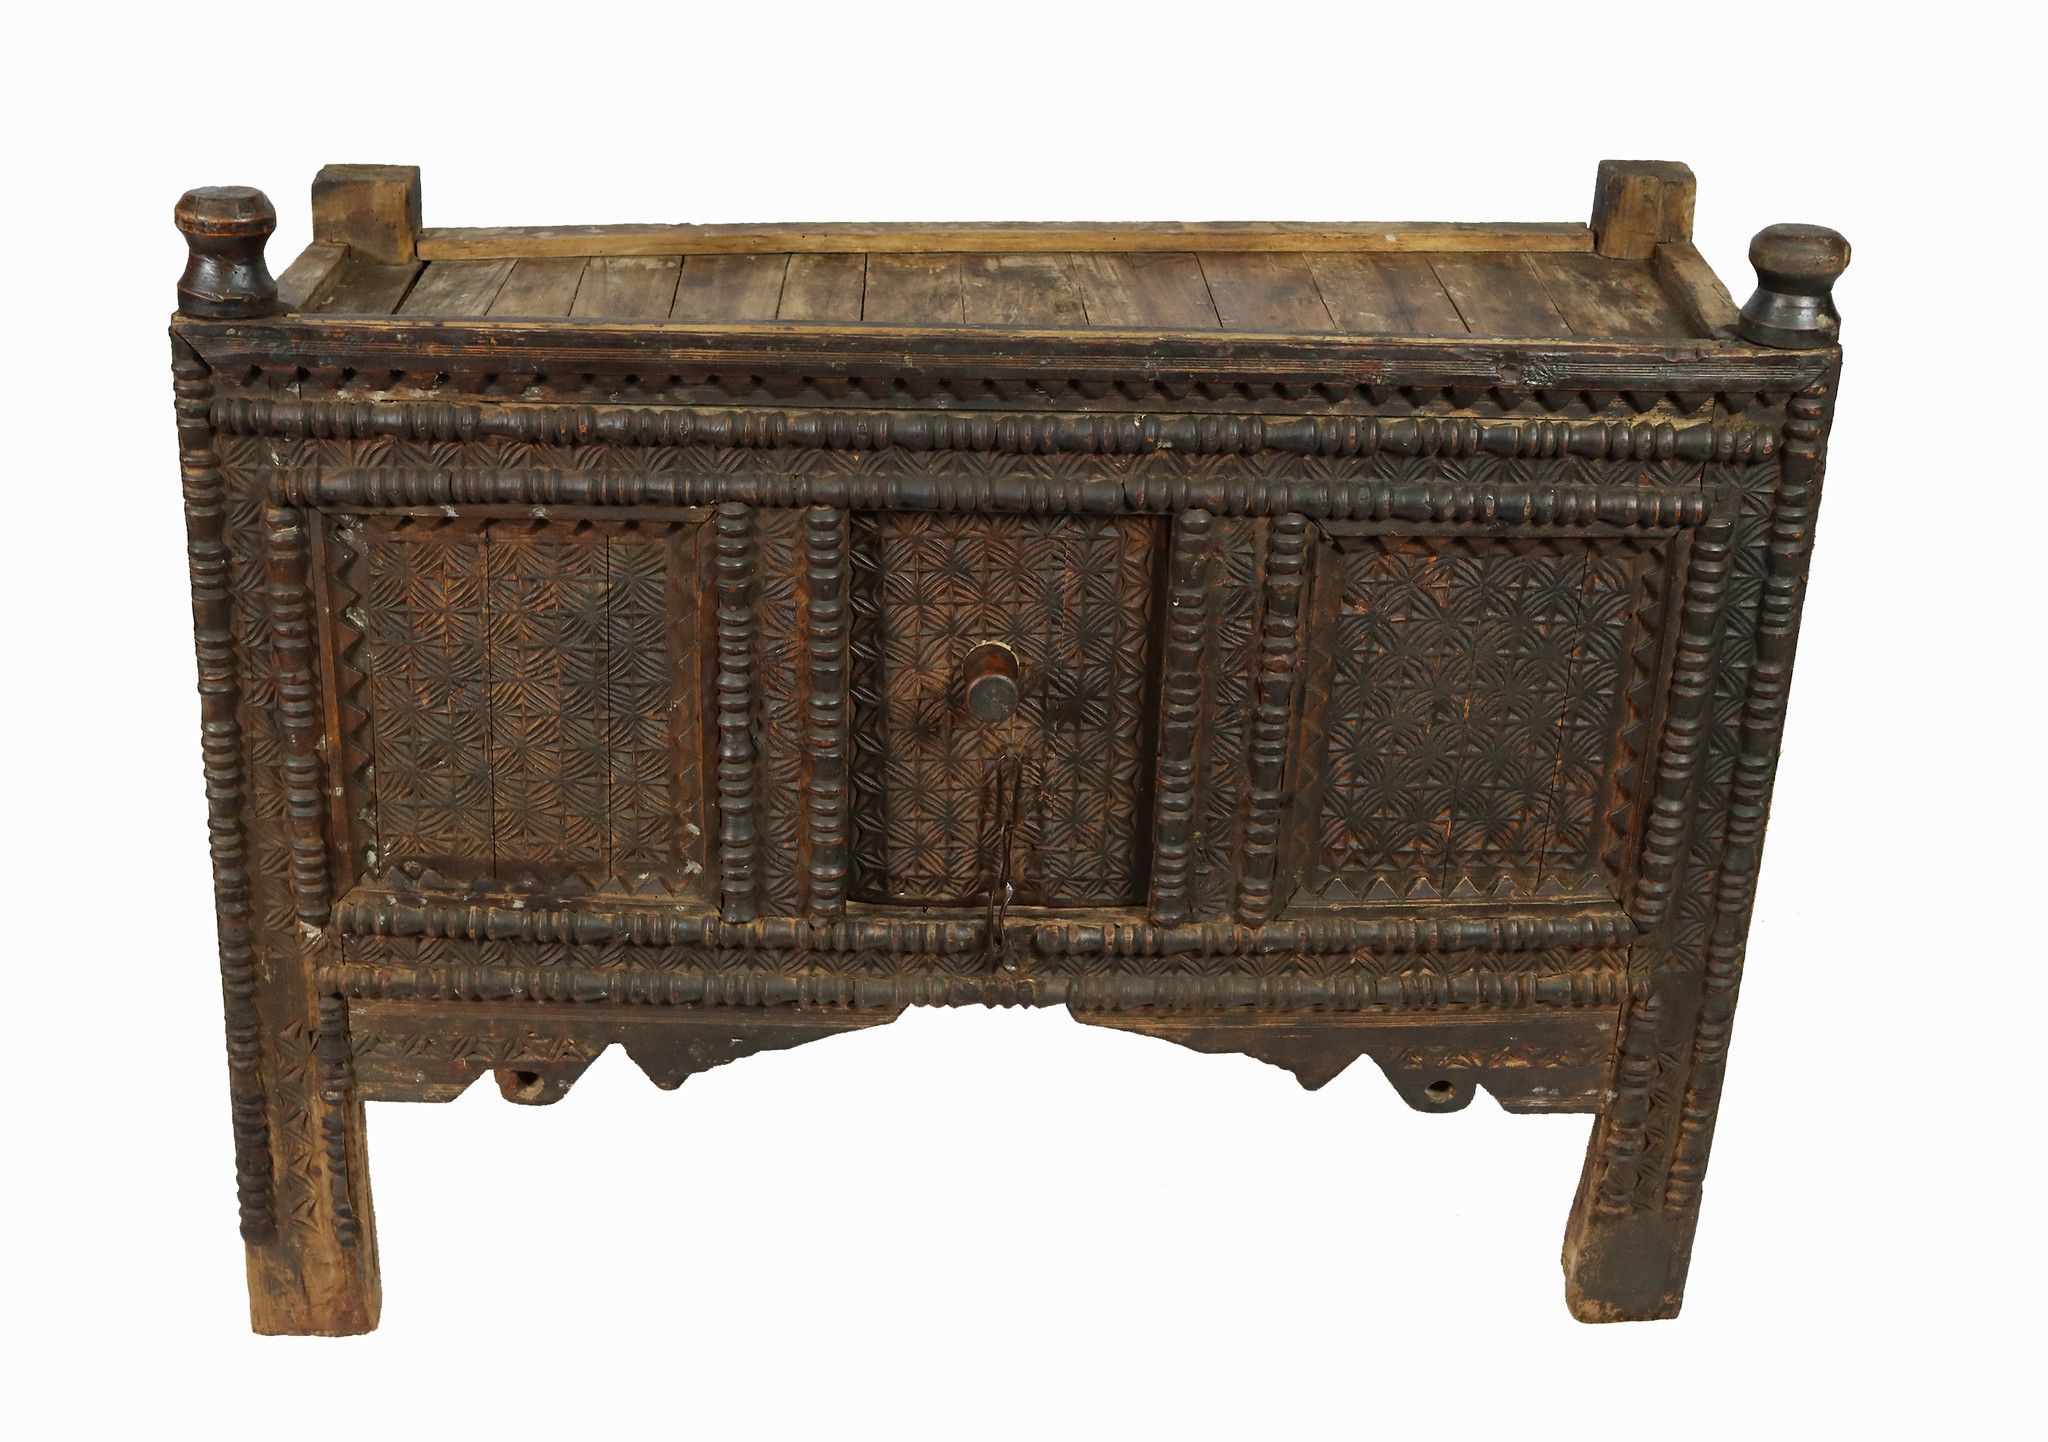 antique 19th century  wooden yurt treasure Dowry Chest from Afghanistan turkmenistan No:22/7